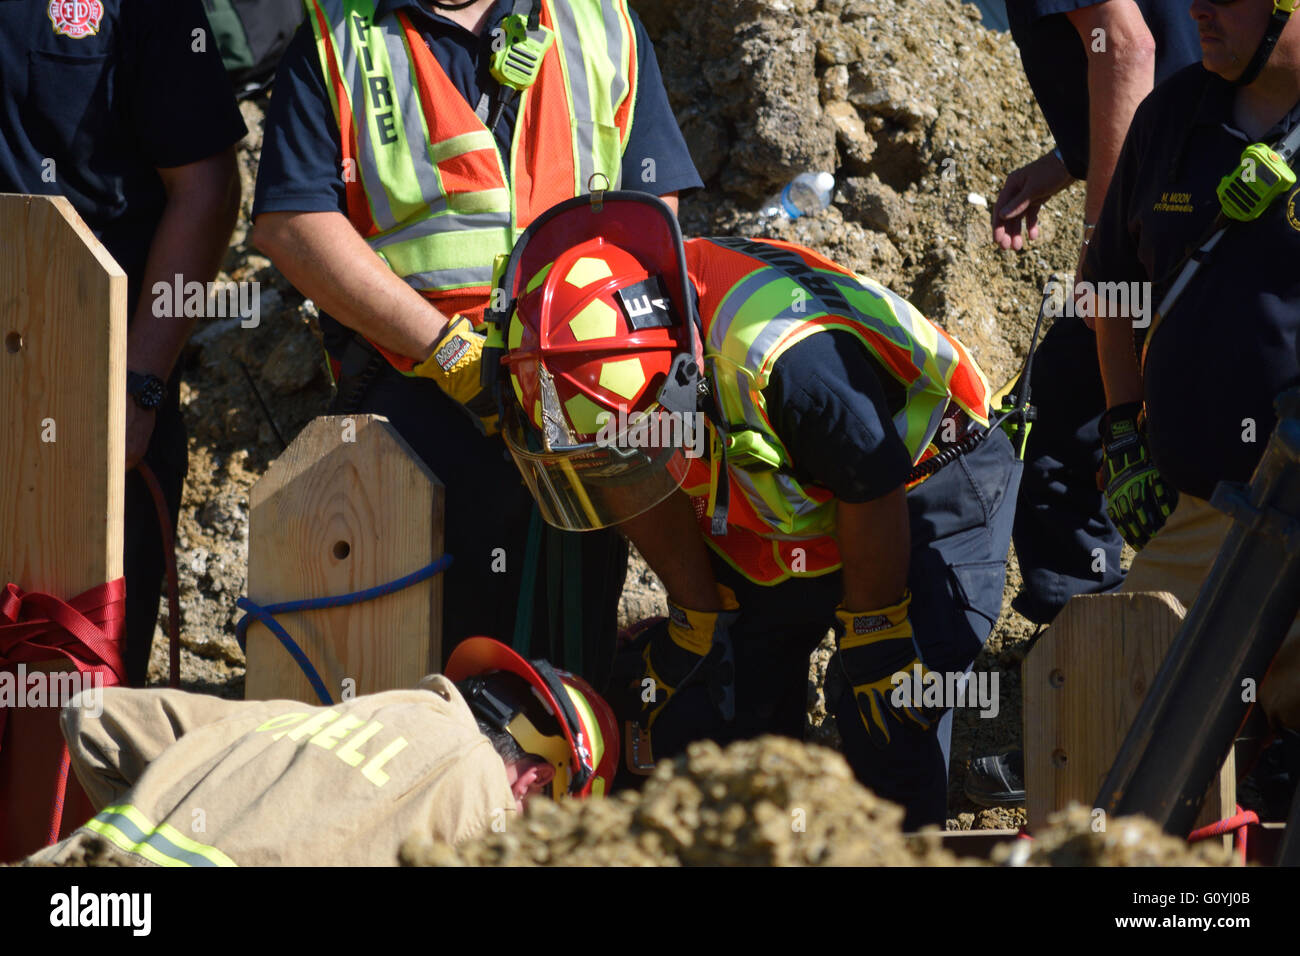 Irving, TX, USA. 5th May, 2016. Rescue workers help dig out a construction worker who was trapped in a twelve foot deep ditch. Credit:  Brian Humek/Alamy Live News. Stock Photo